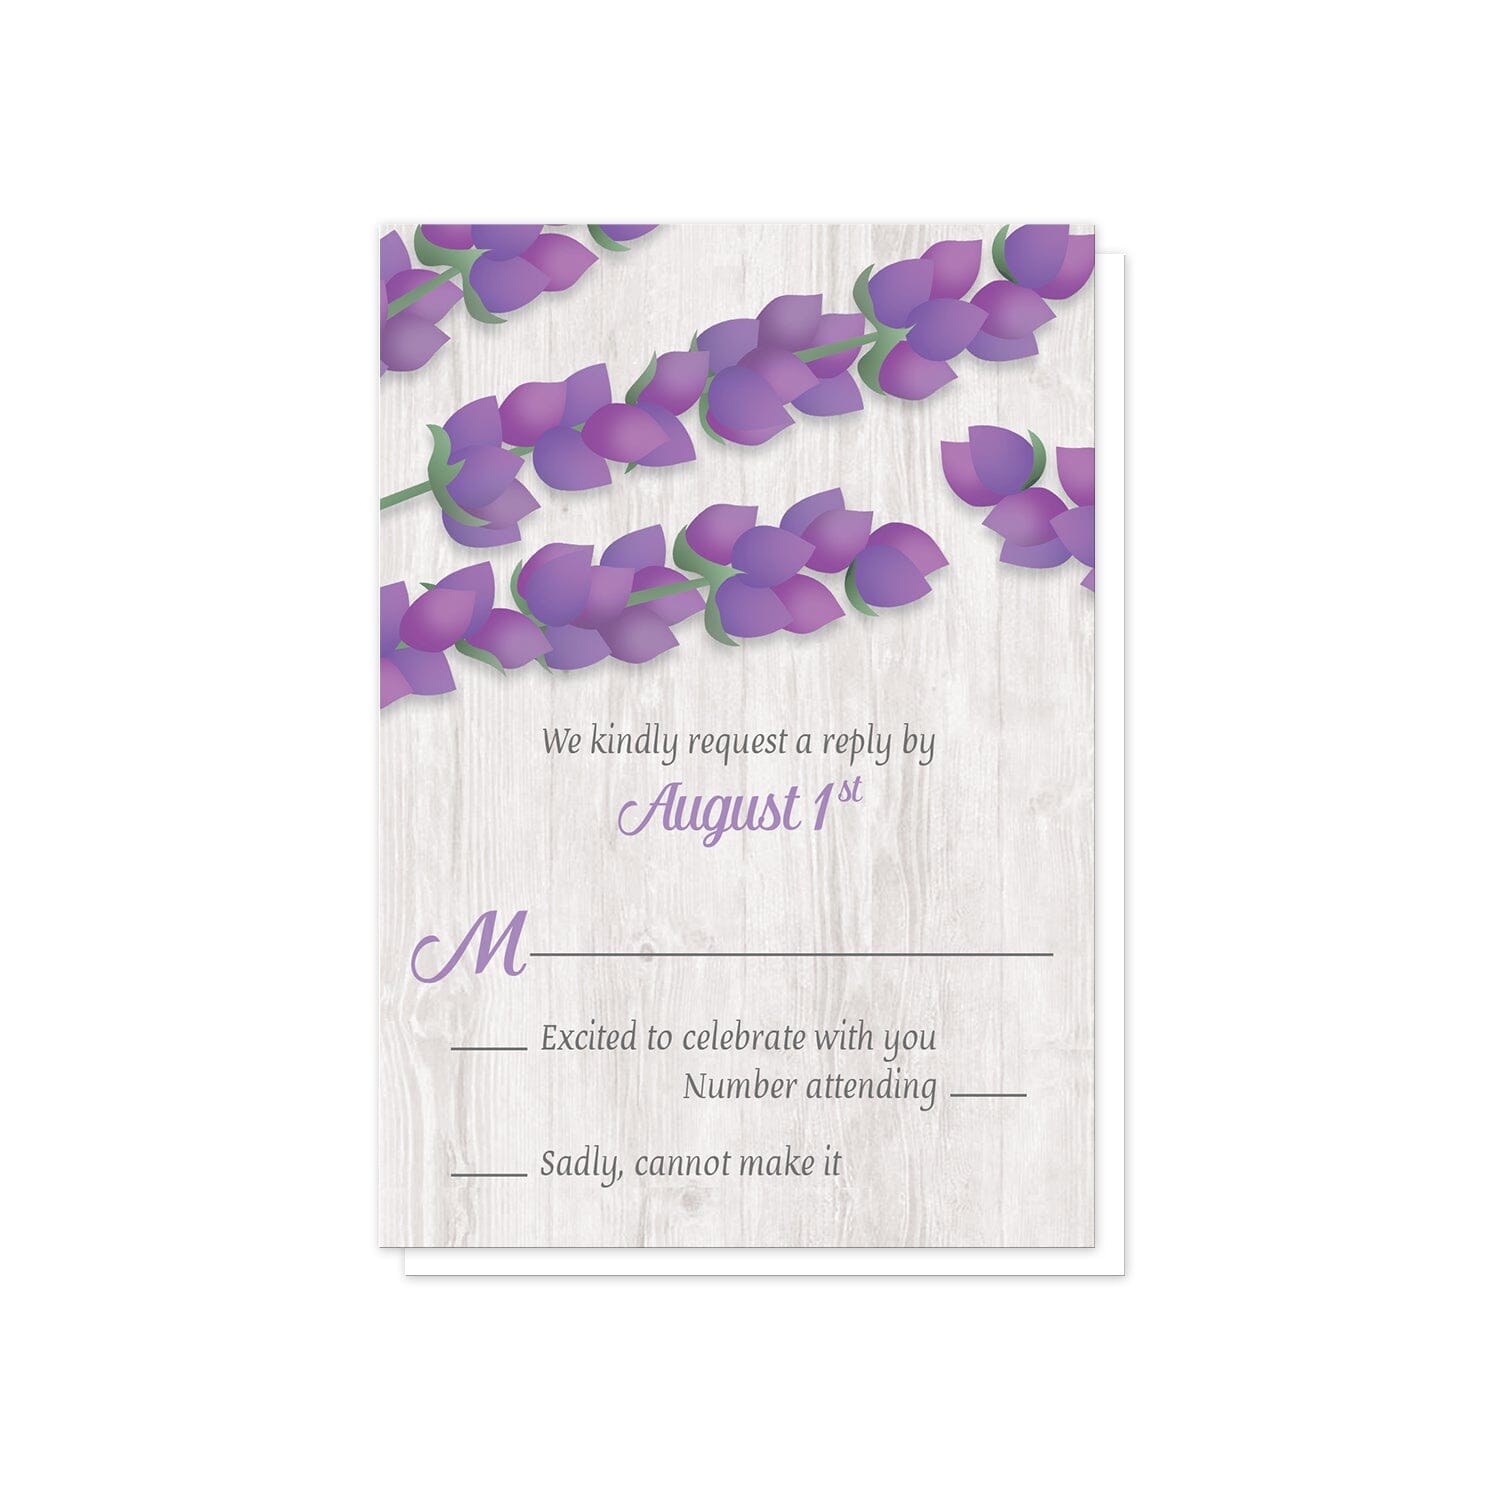 Whitewashed Wood Lavender RSVP Cards at Artistically Invited.